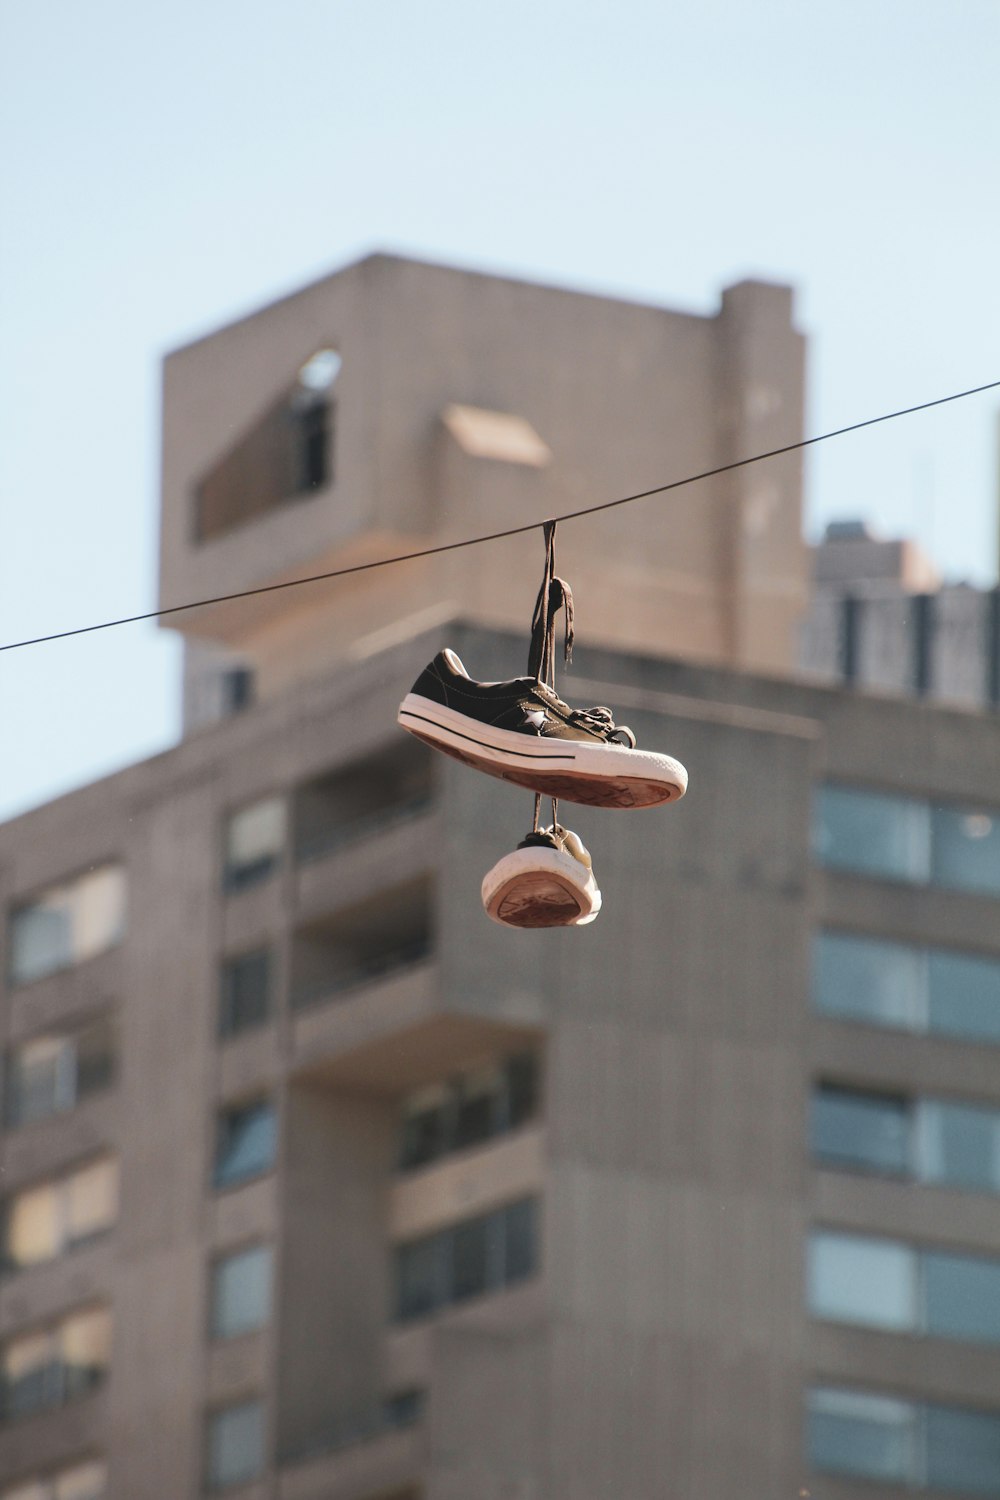 shoes hanging on clothesline